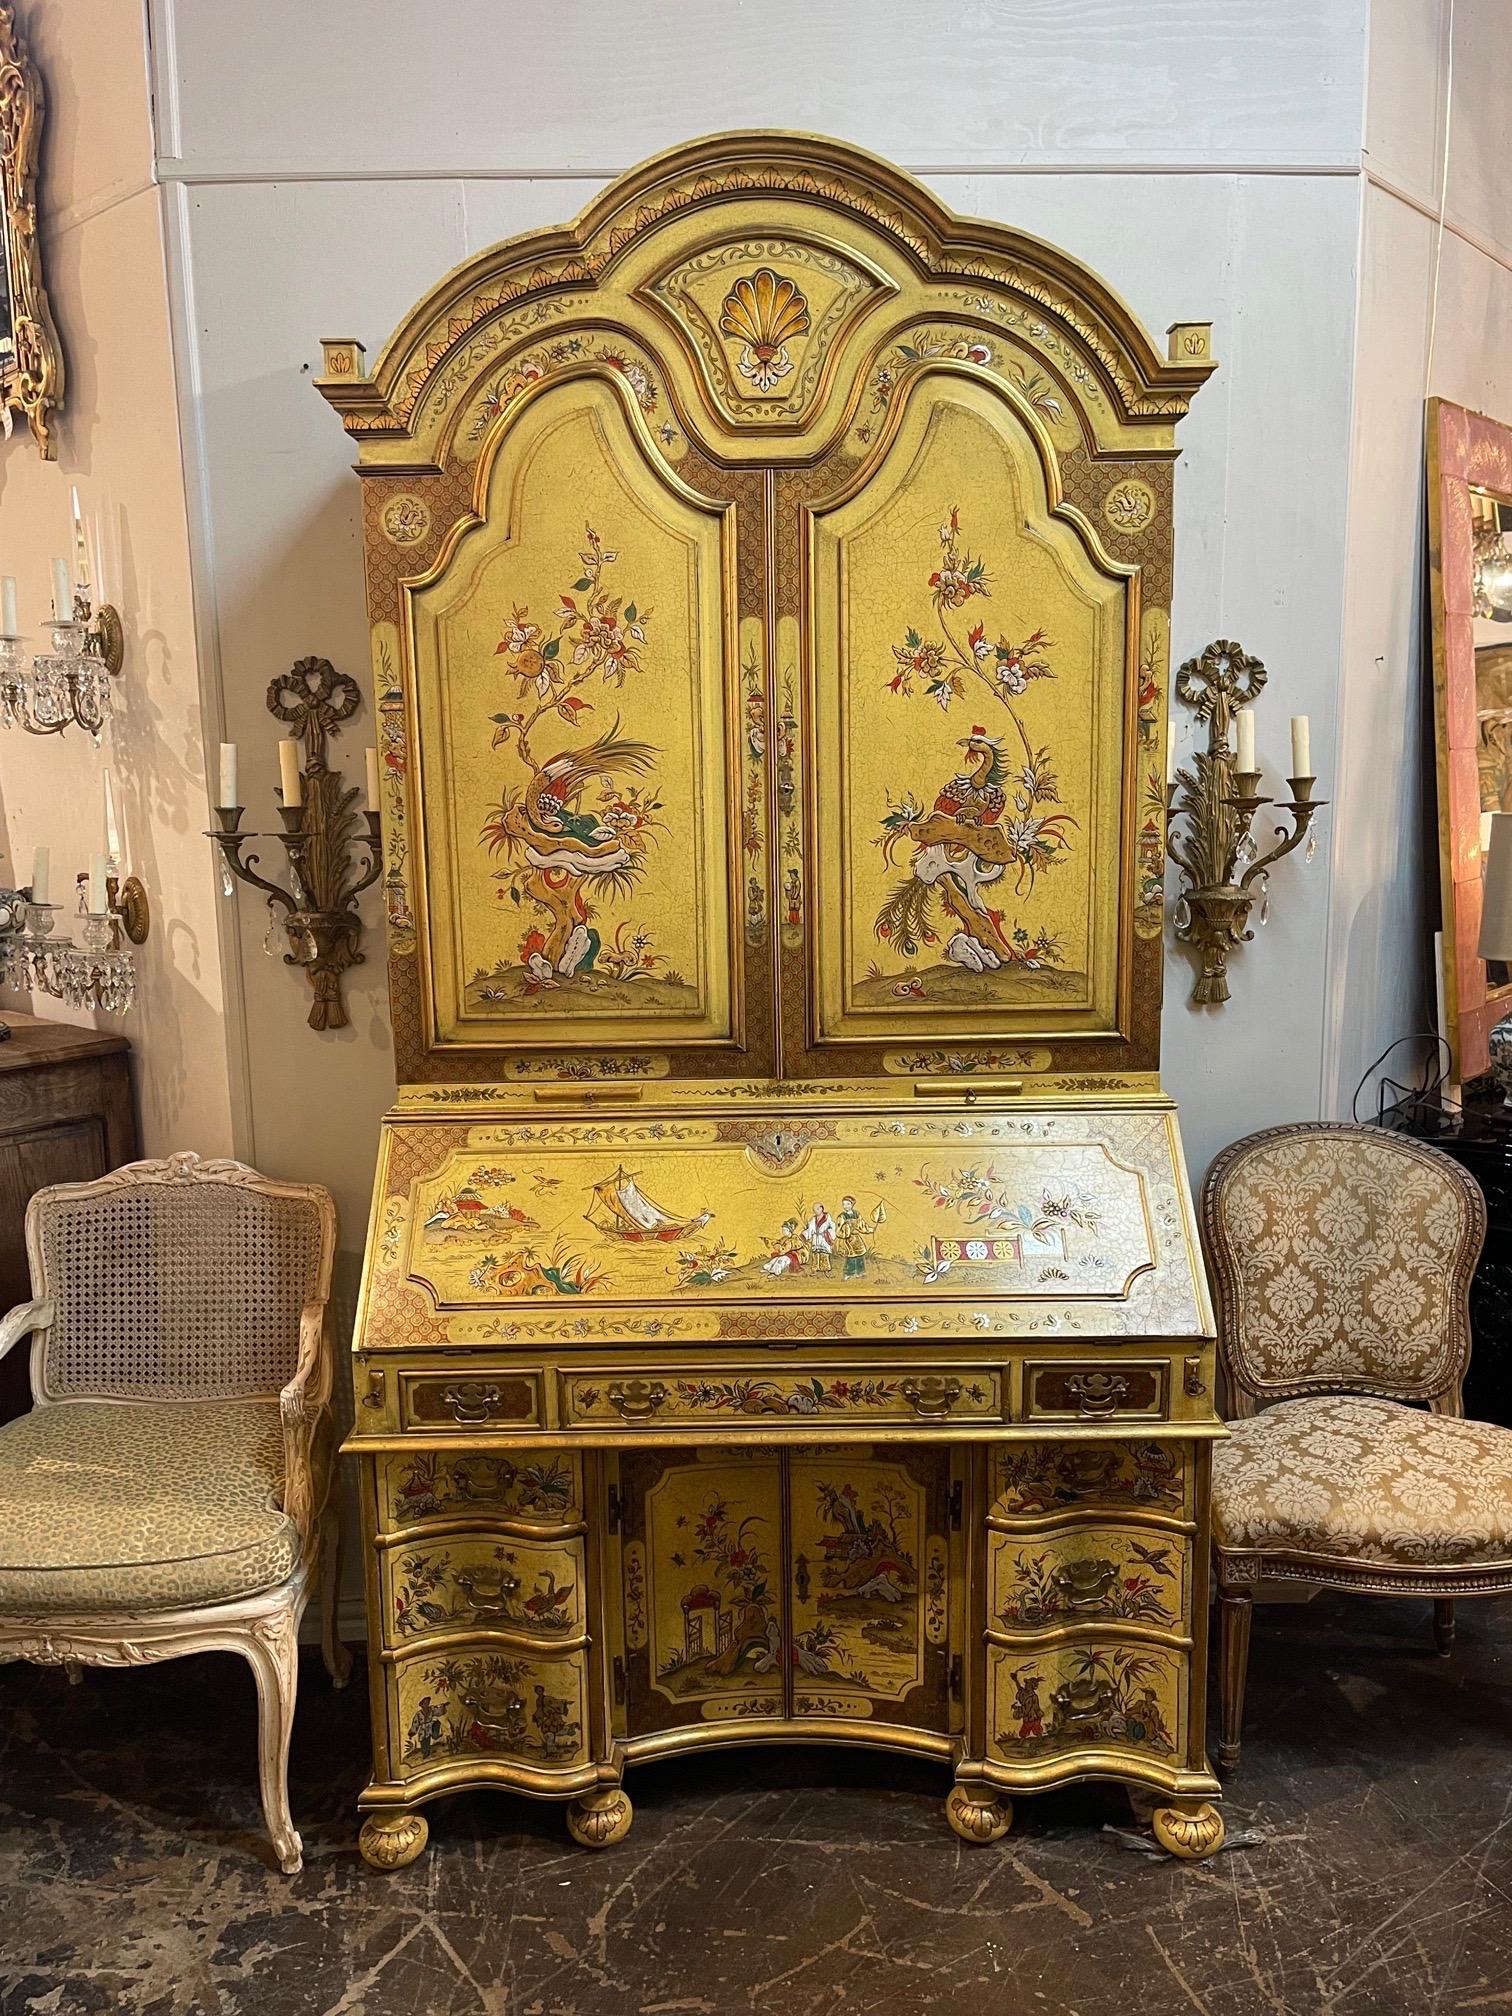 Very fine English secretary cabinet with hand painted Chinoiserie design. Such pretty decorative designs, including birds, flowers and Asian images. And as you open the piece see multiple compartments and drawers. Exquisite!!.